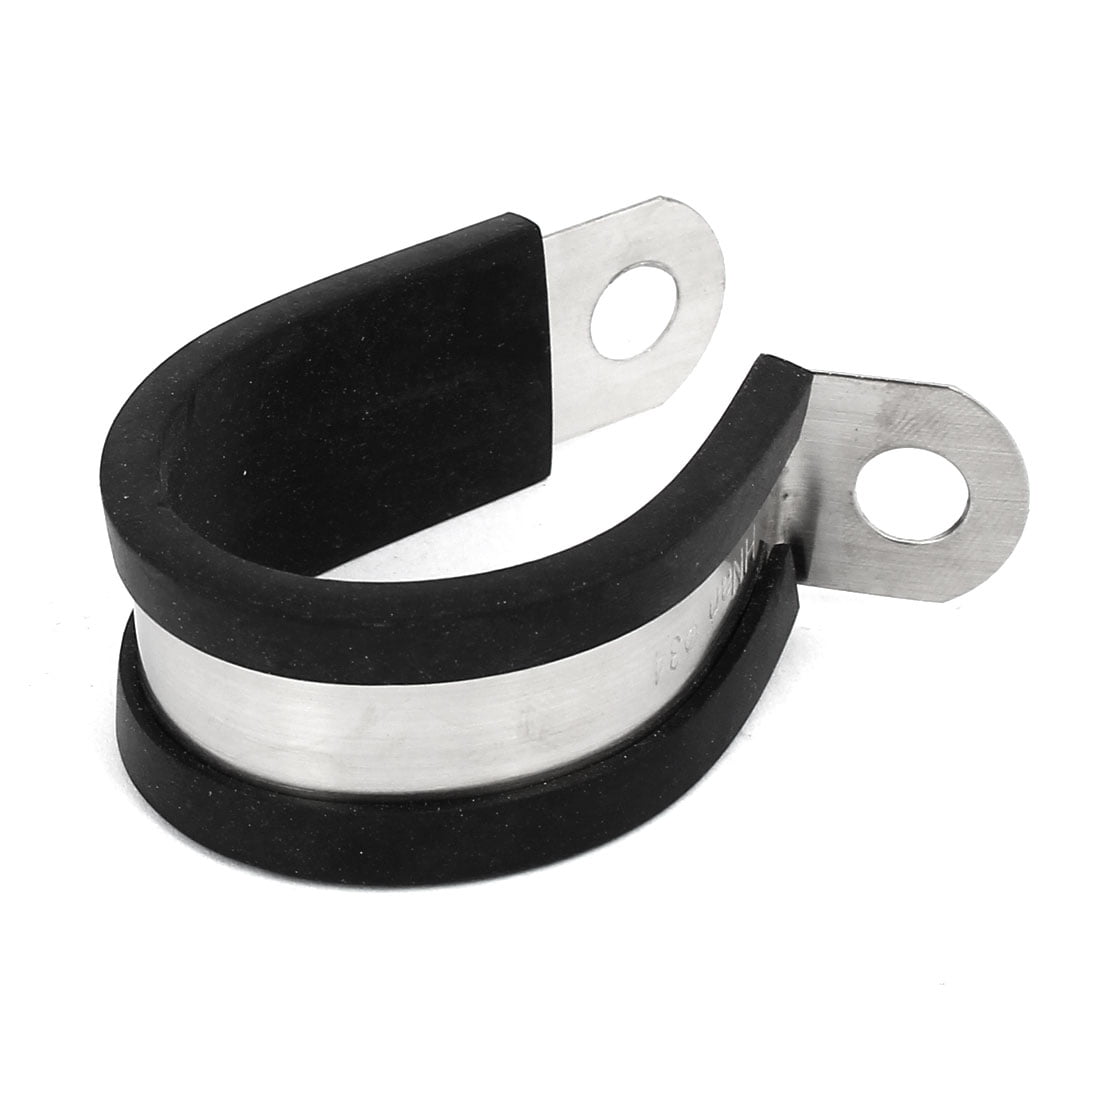 Aexit 65mm Dia Clamps EPDM Rubber Lined P Clips Water Pipe Tube Hose Clamps Strap Clamps Holder 2pcs 